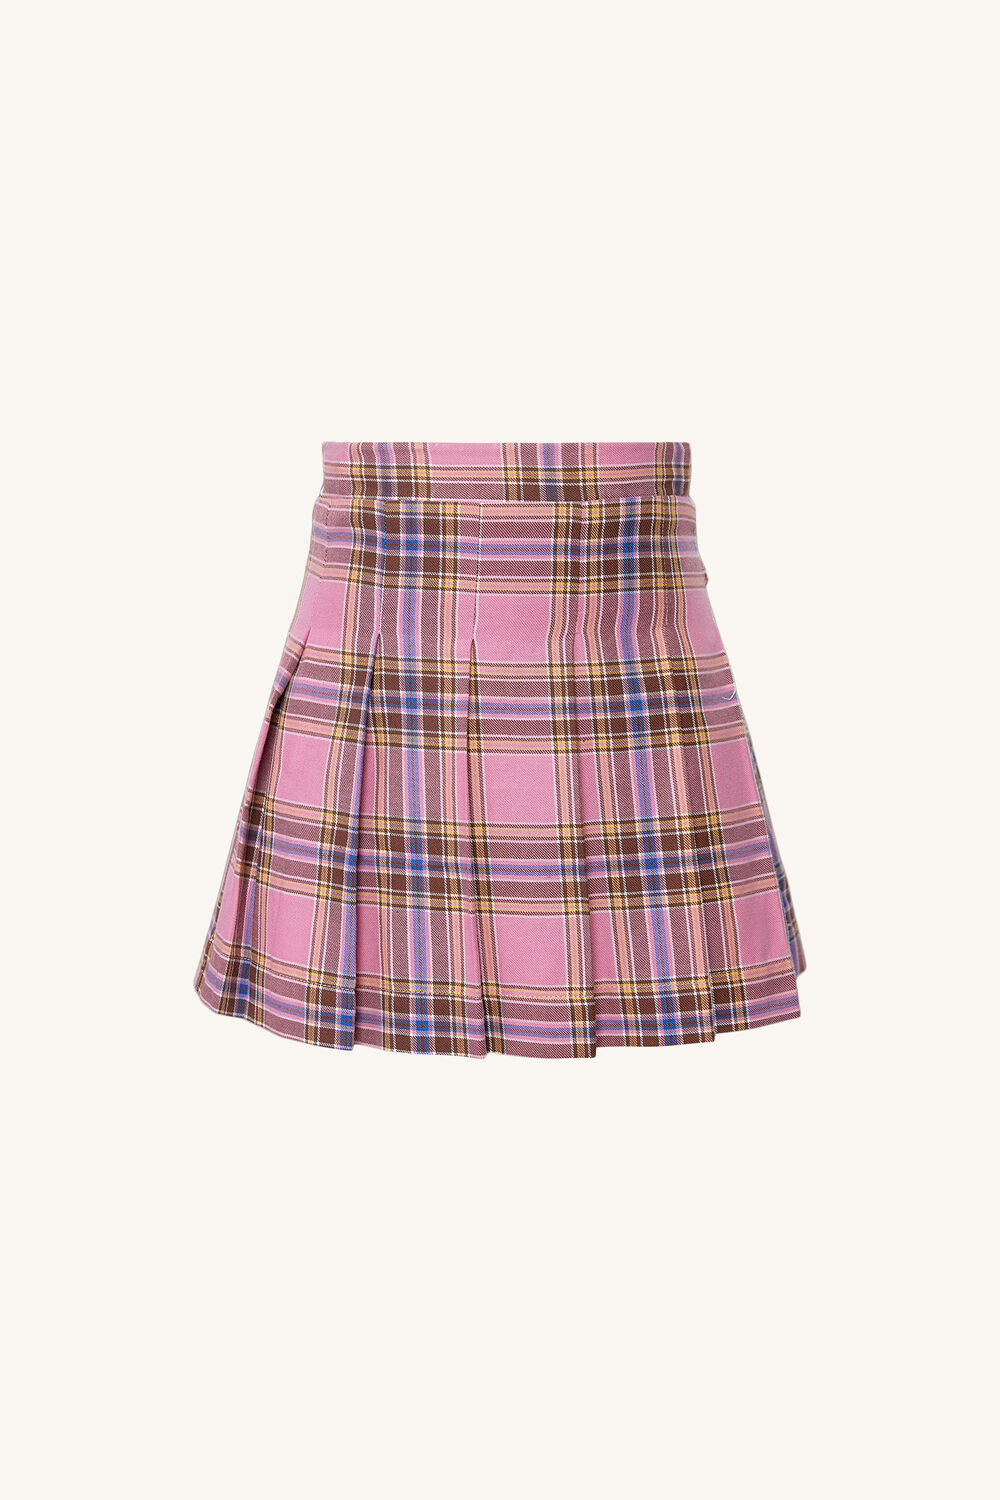 PINK CHECK PLEAT SKIRT in colour PEARL